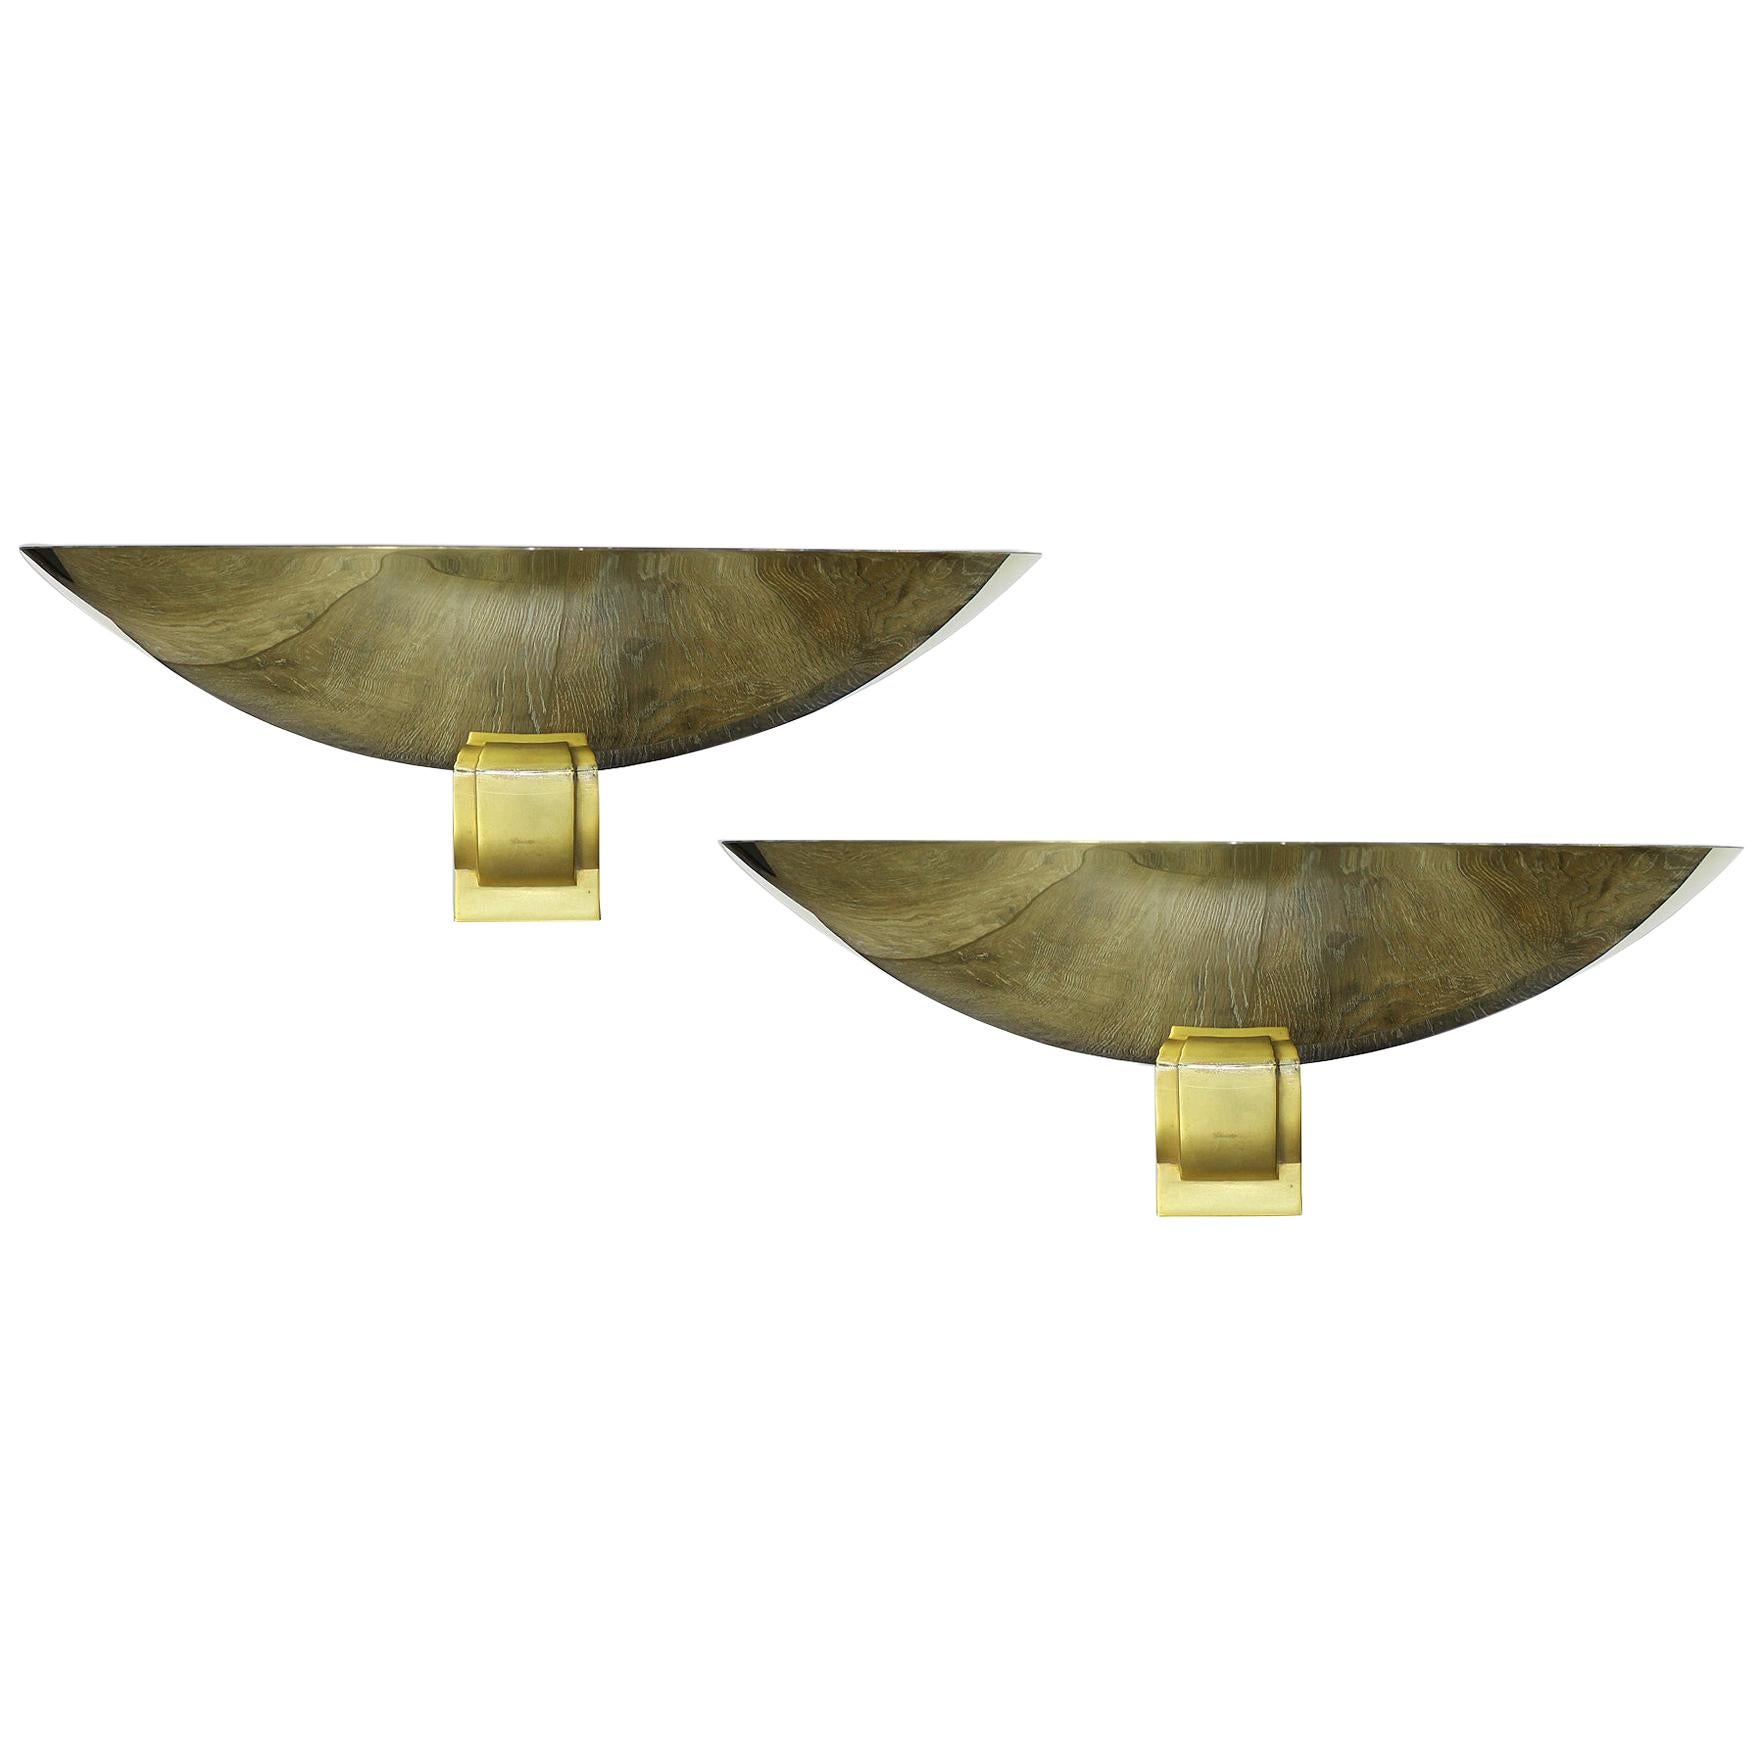 Perzel Rare Pair of Large Sconces France 1950 (Attributed to)